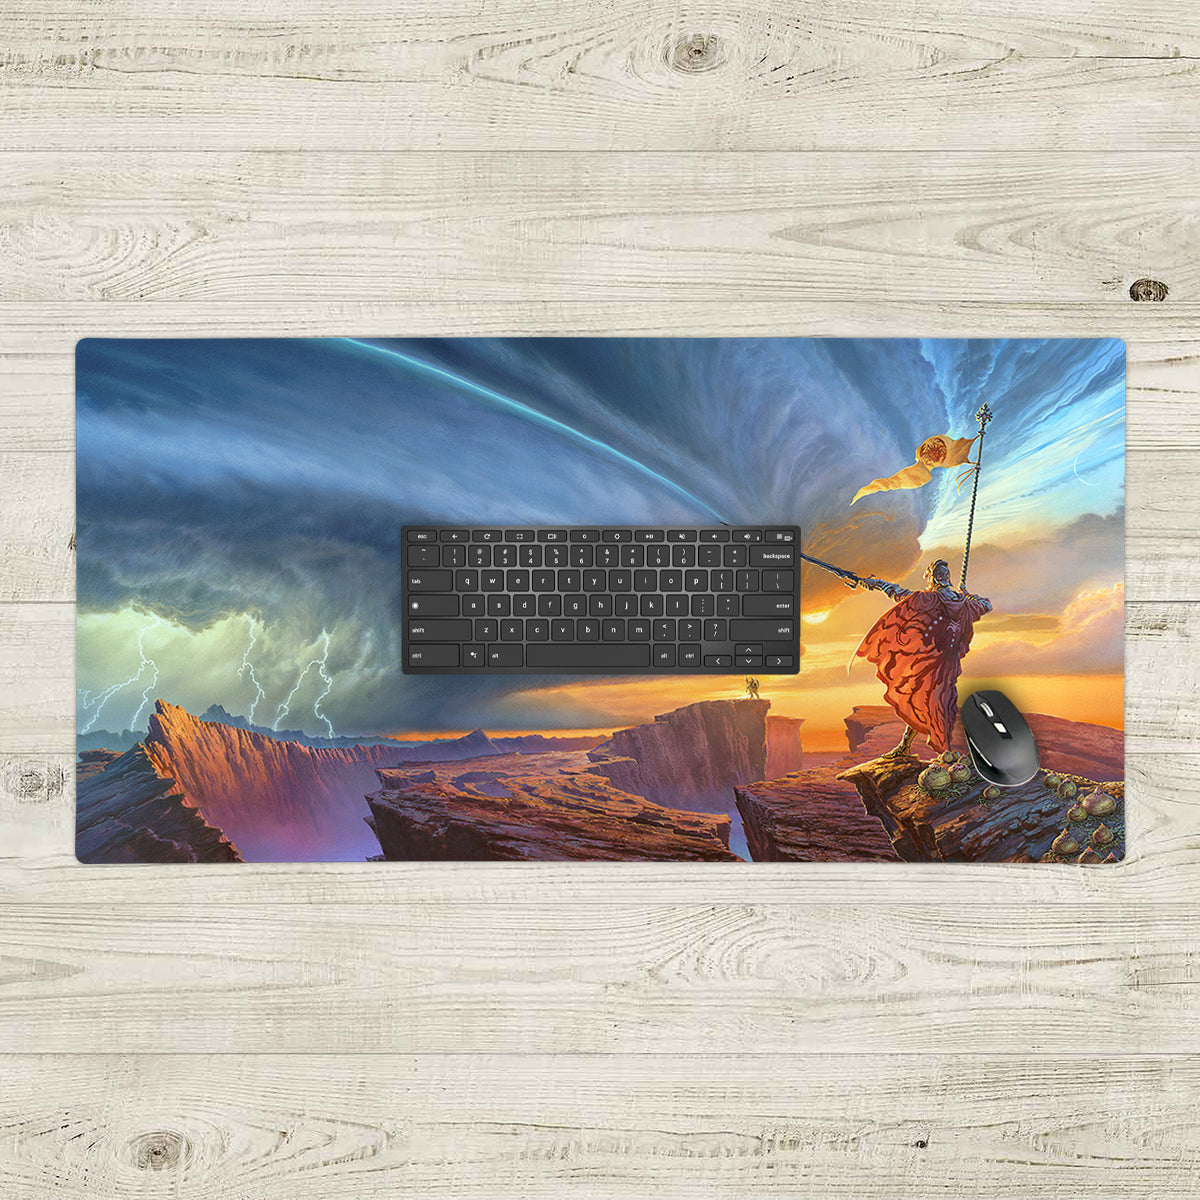 Custom Extended XXL Mousepad (48 x 24) – Inked Gaming